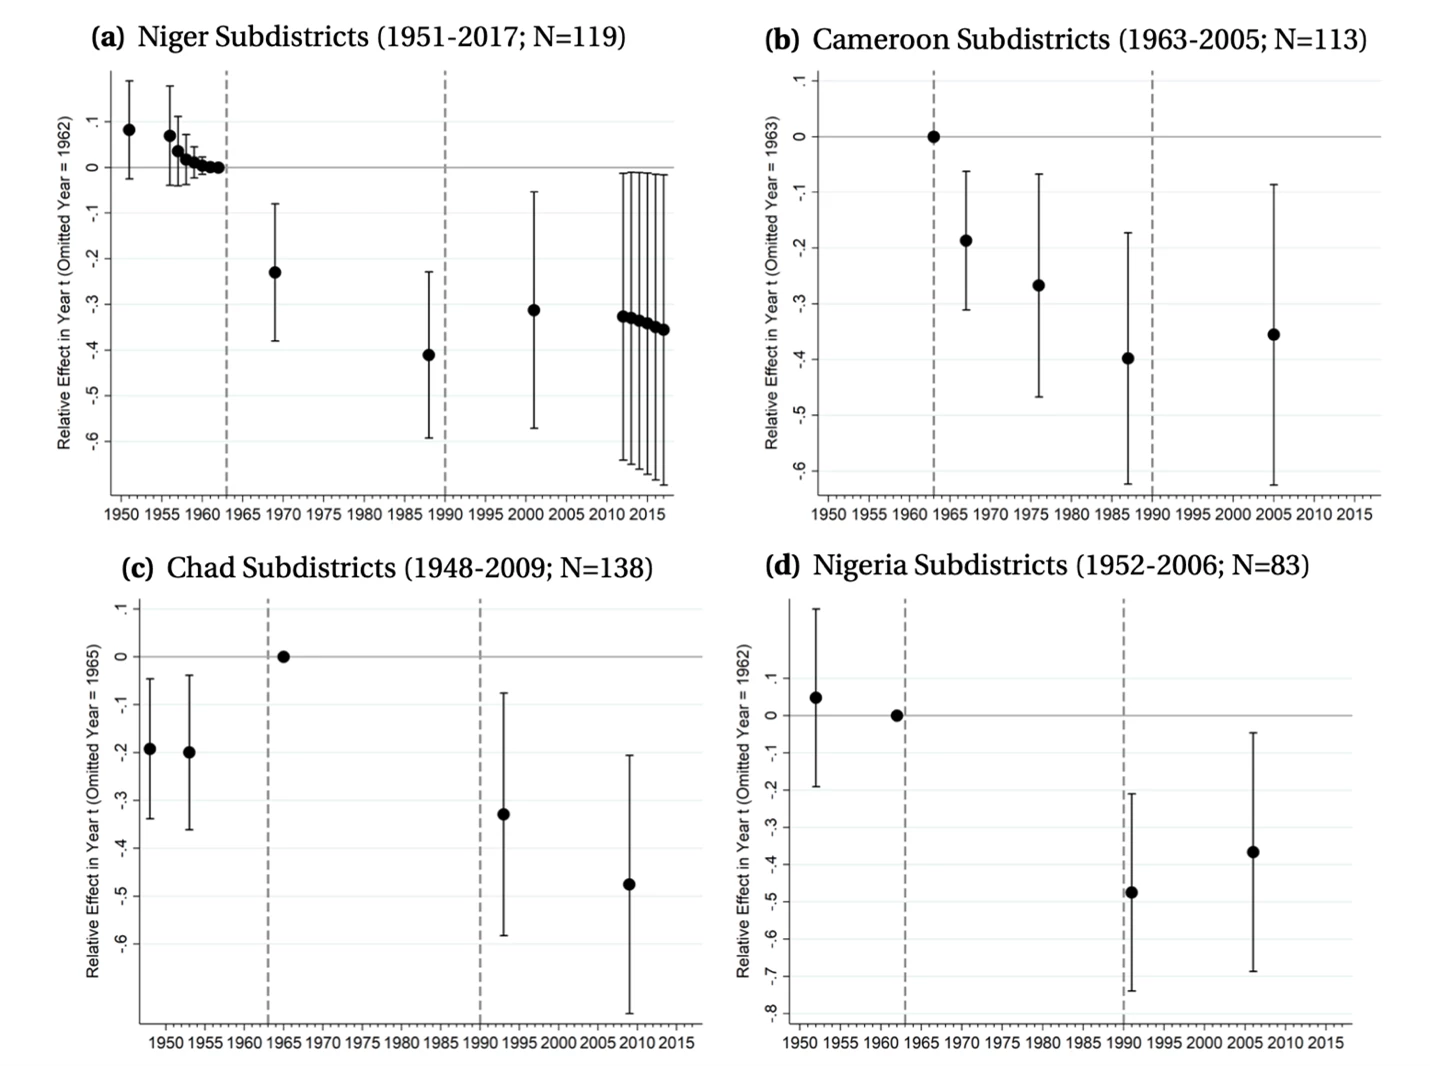 Graphs (a) to (d) show the relative total population effects of proximity to Lake Chad for each country. 